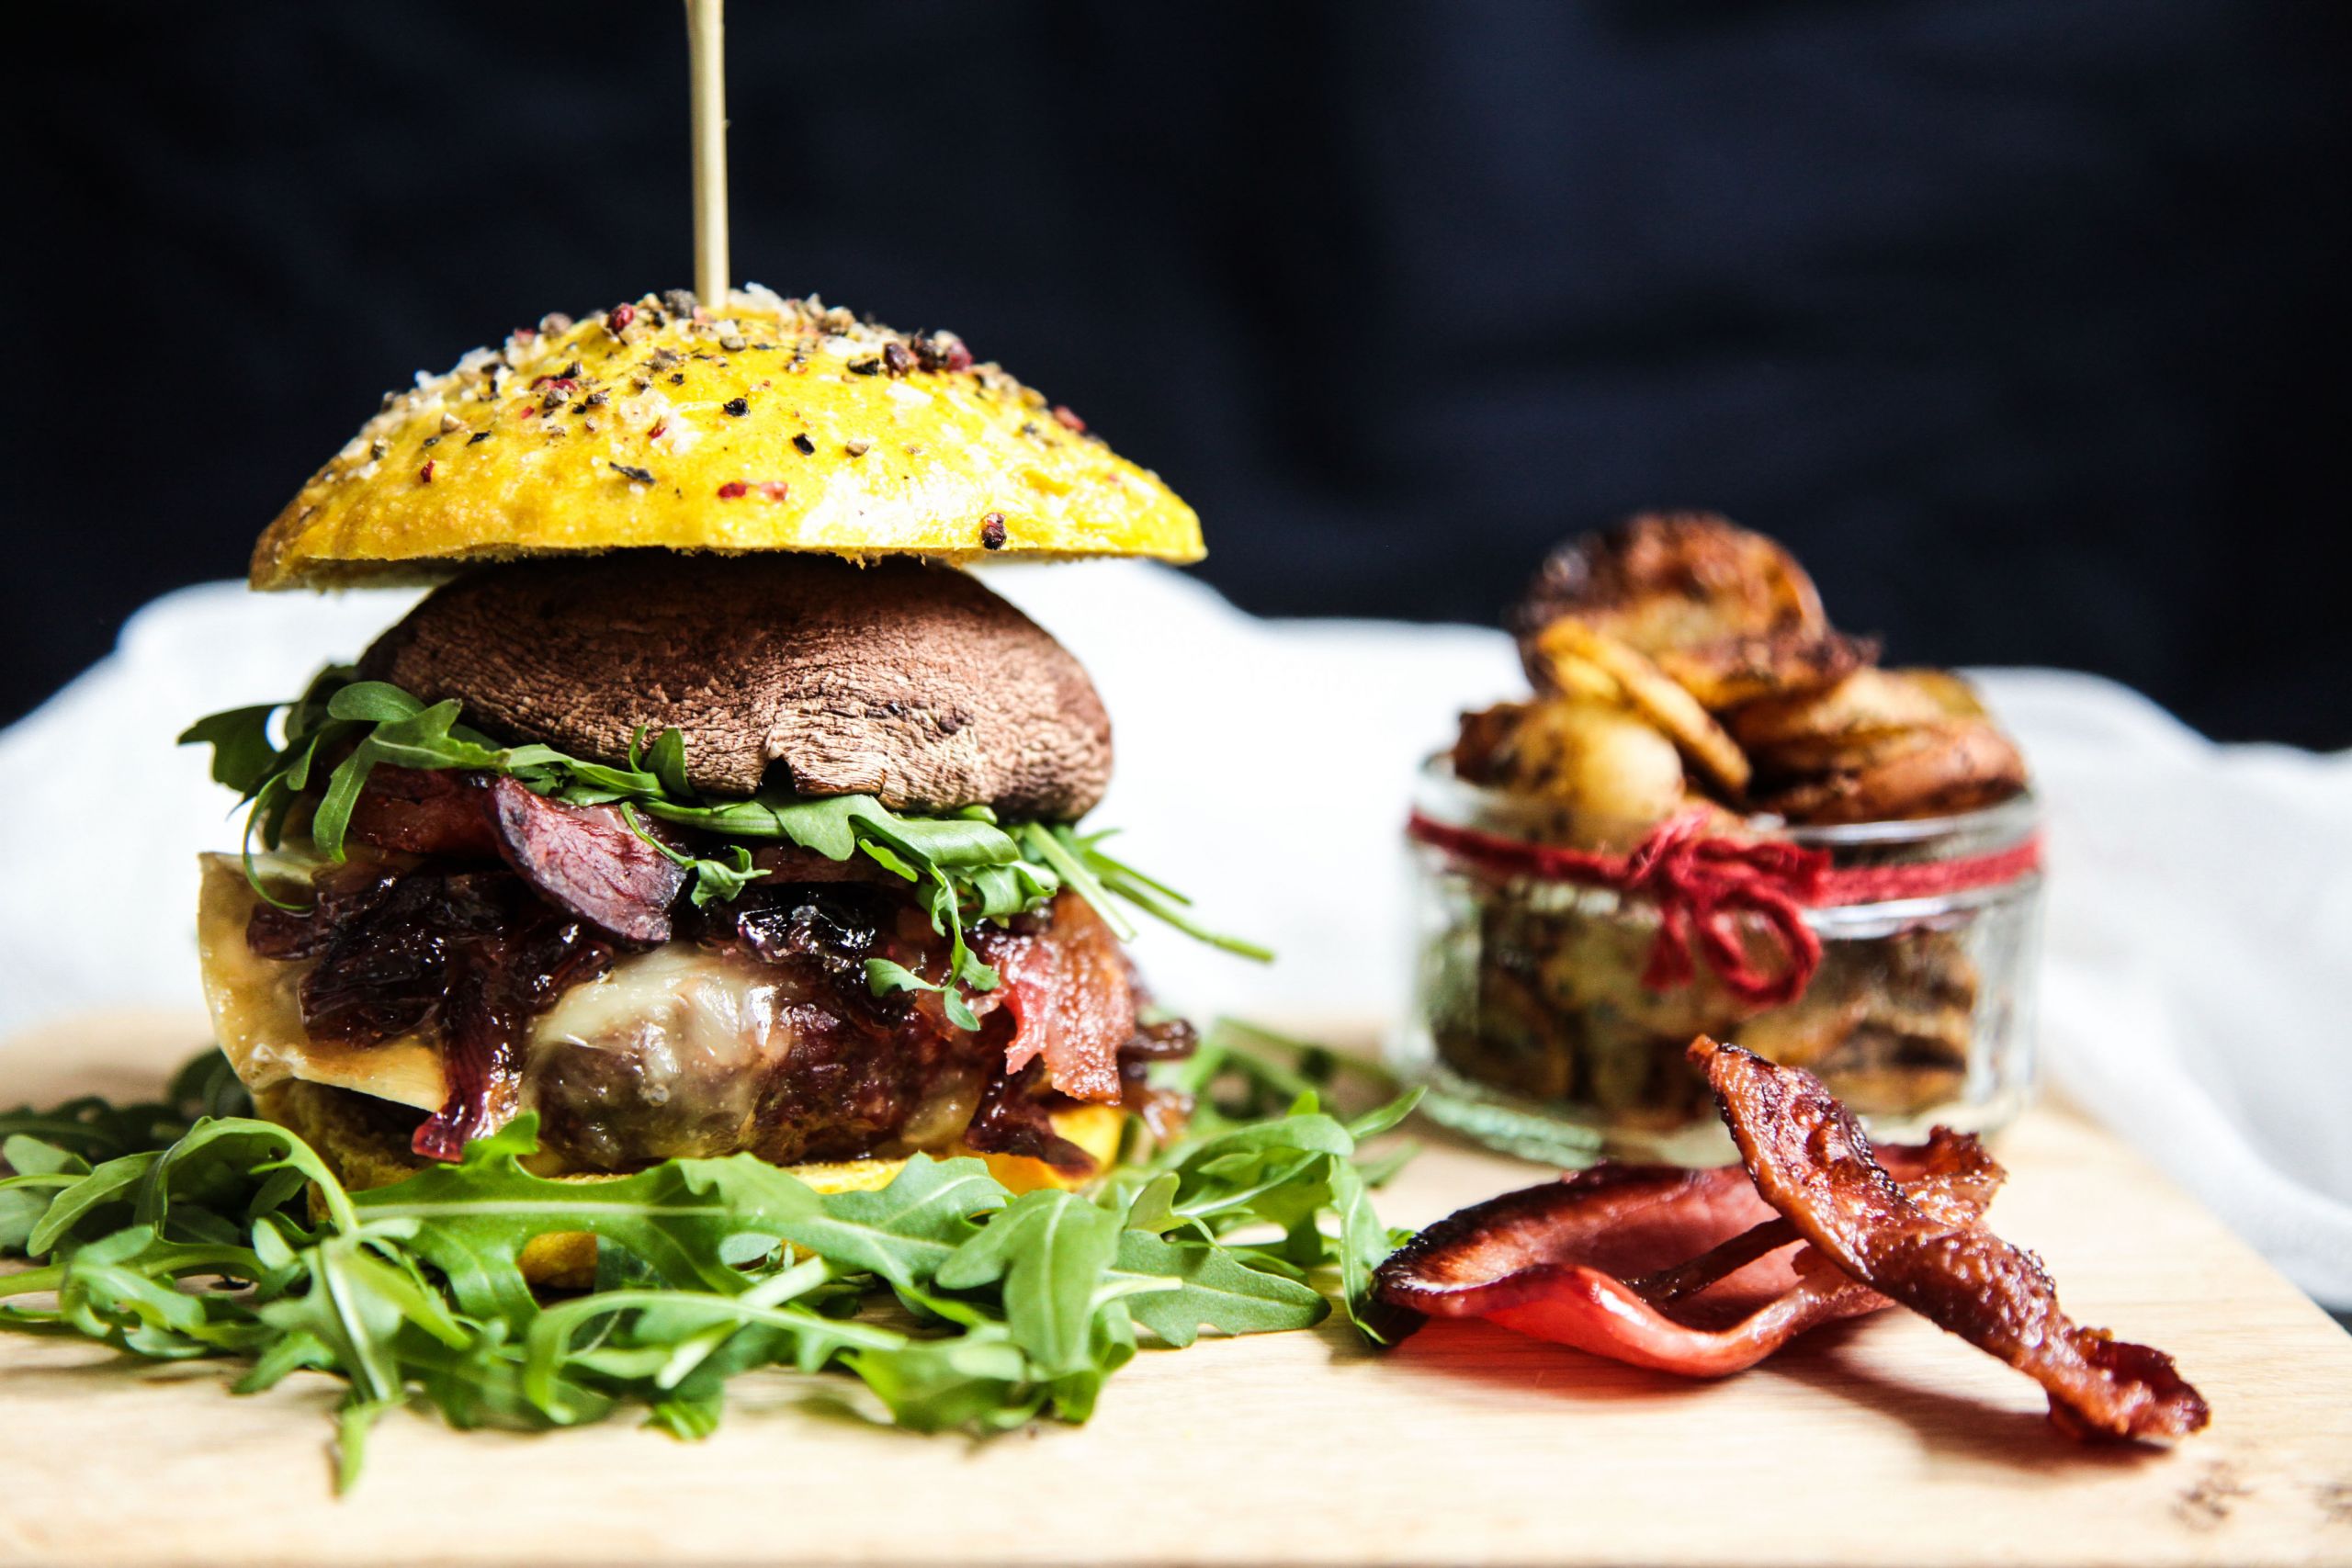 Hamburgers By Gourmet
 Baked Gourmet Burger with Brie & Caramelised ions